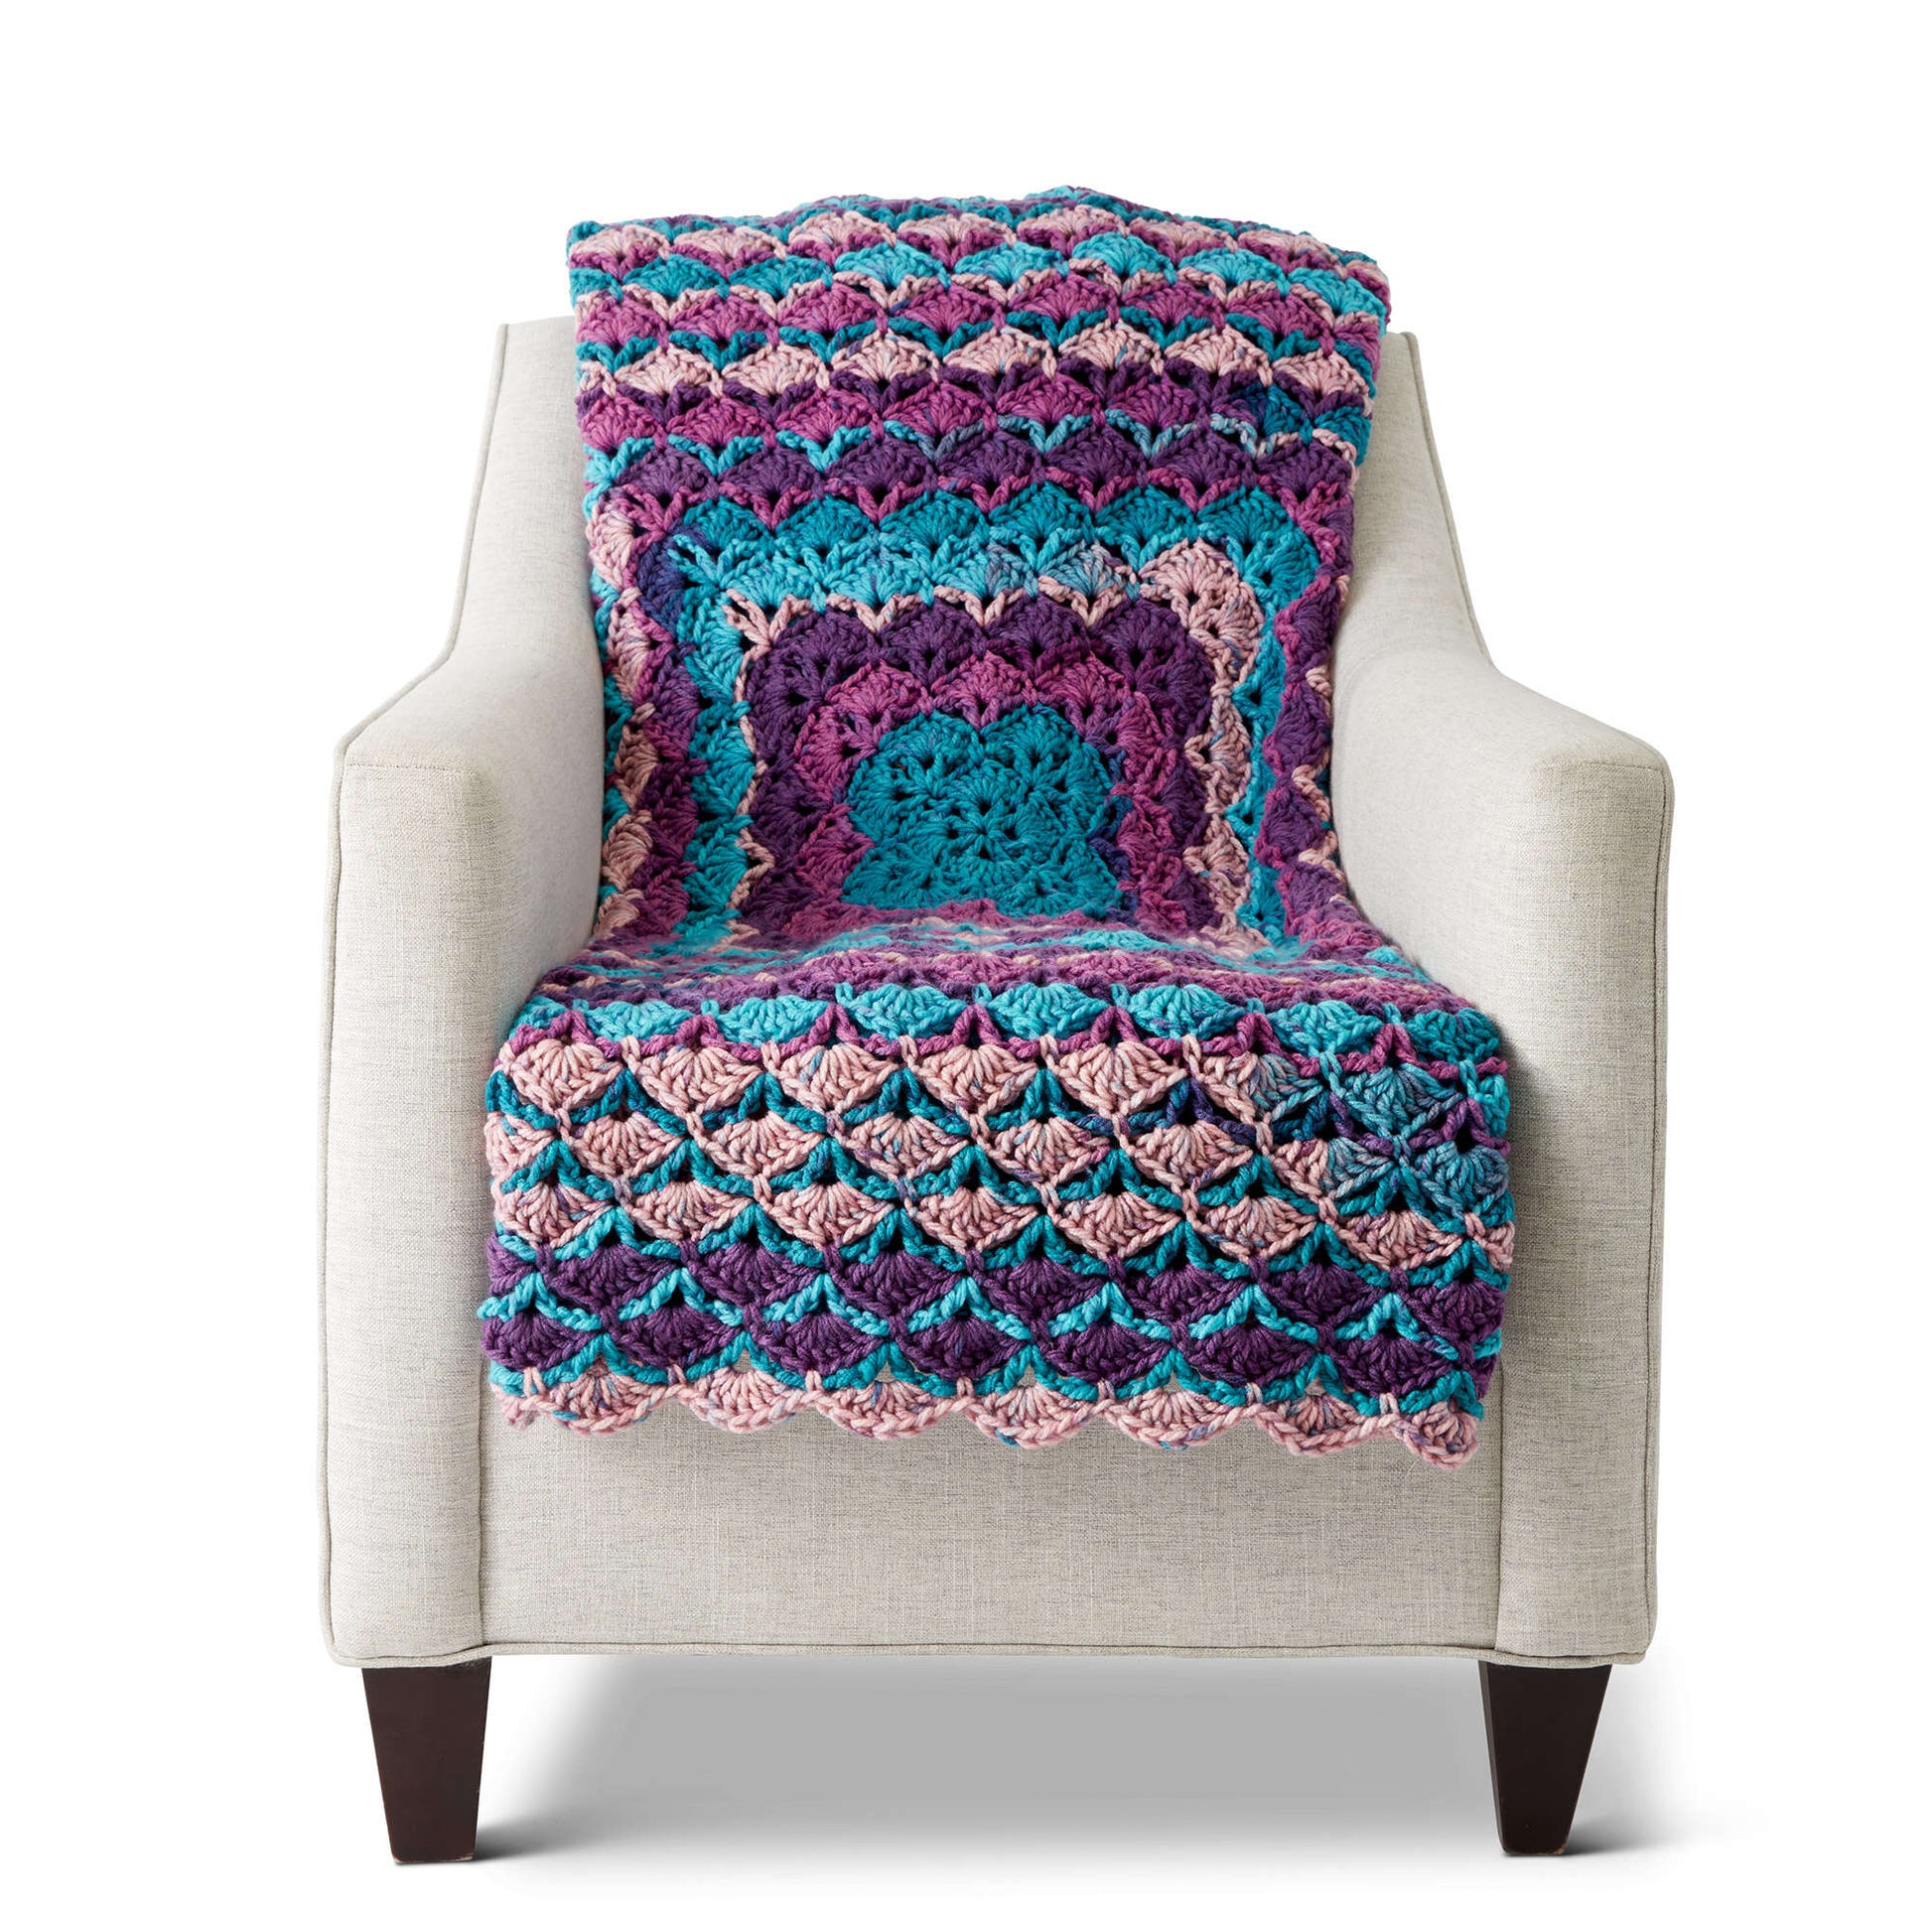 Free Caron From The Middle Crochet Blanket Pattern